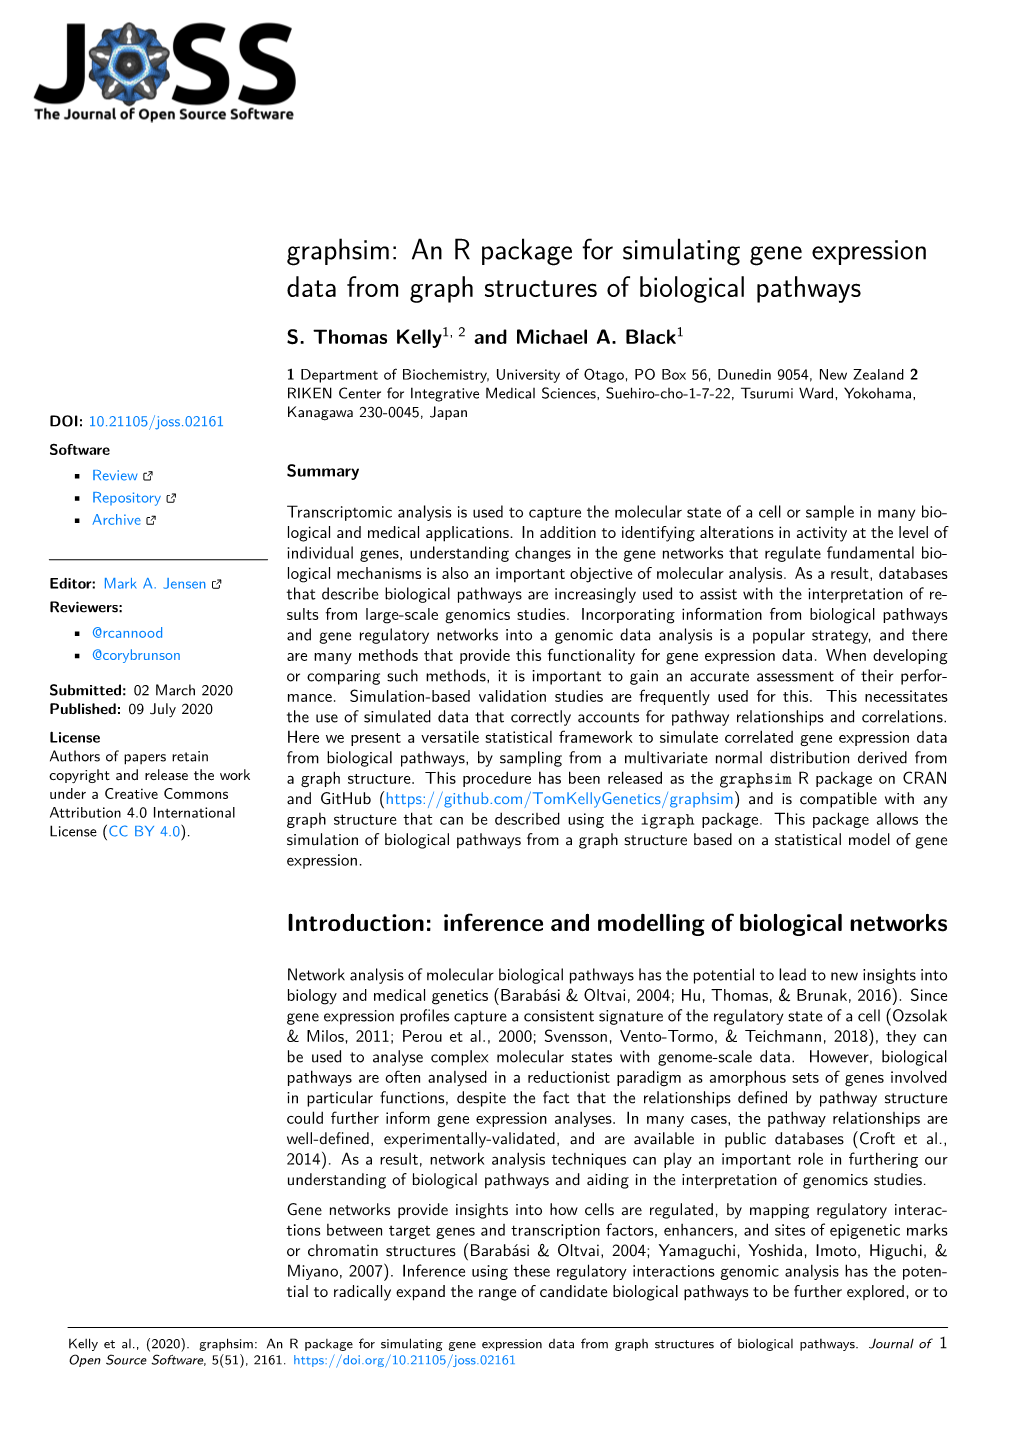 An R Package for Simulating Gene Expression Data from Graph Structures of Biological Pathways